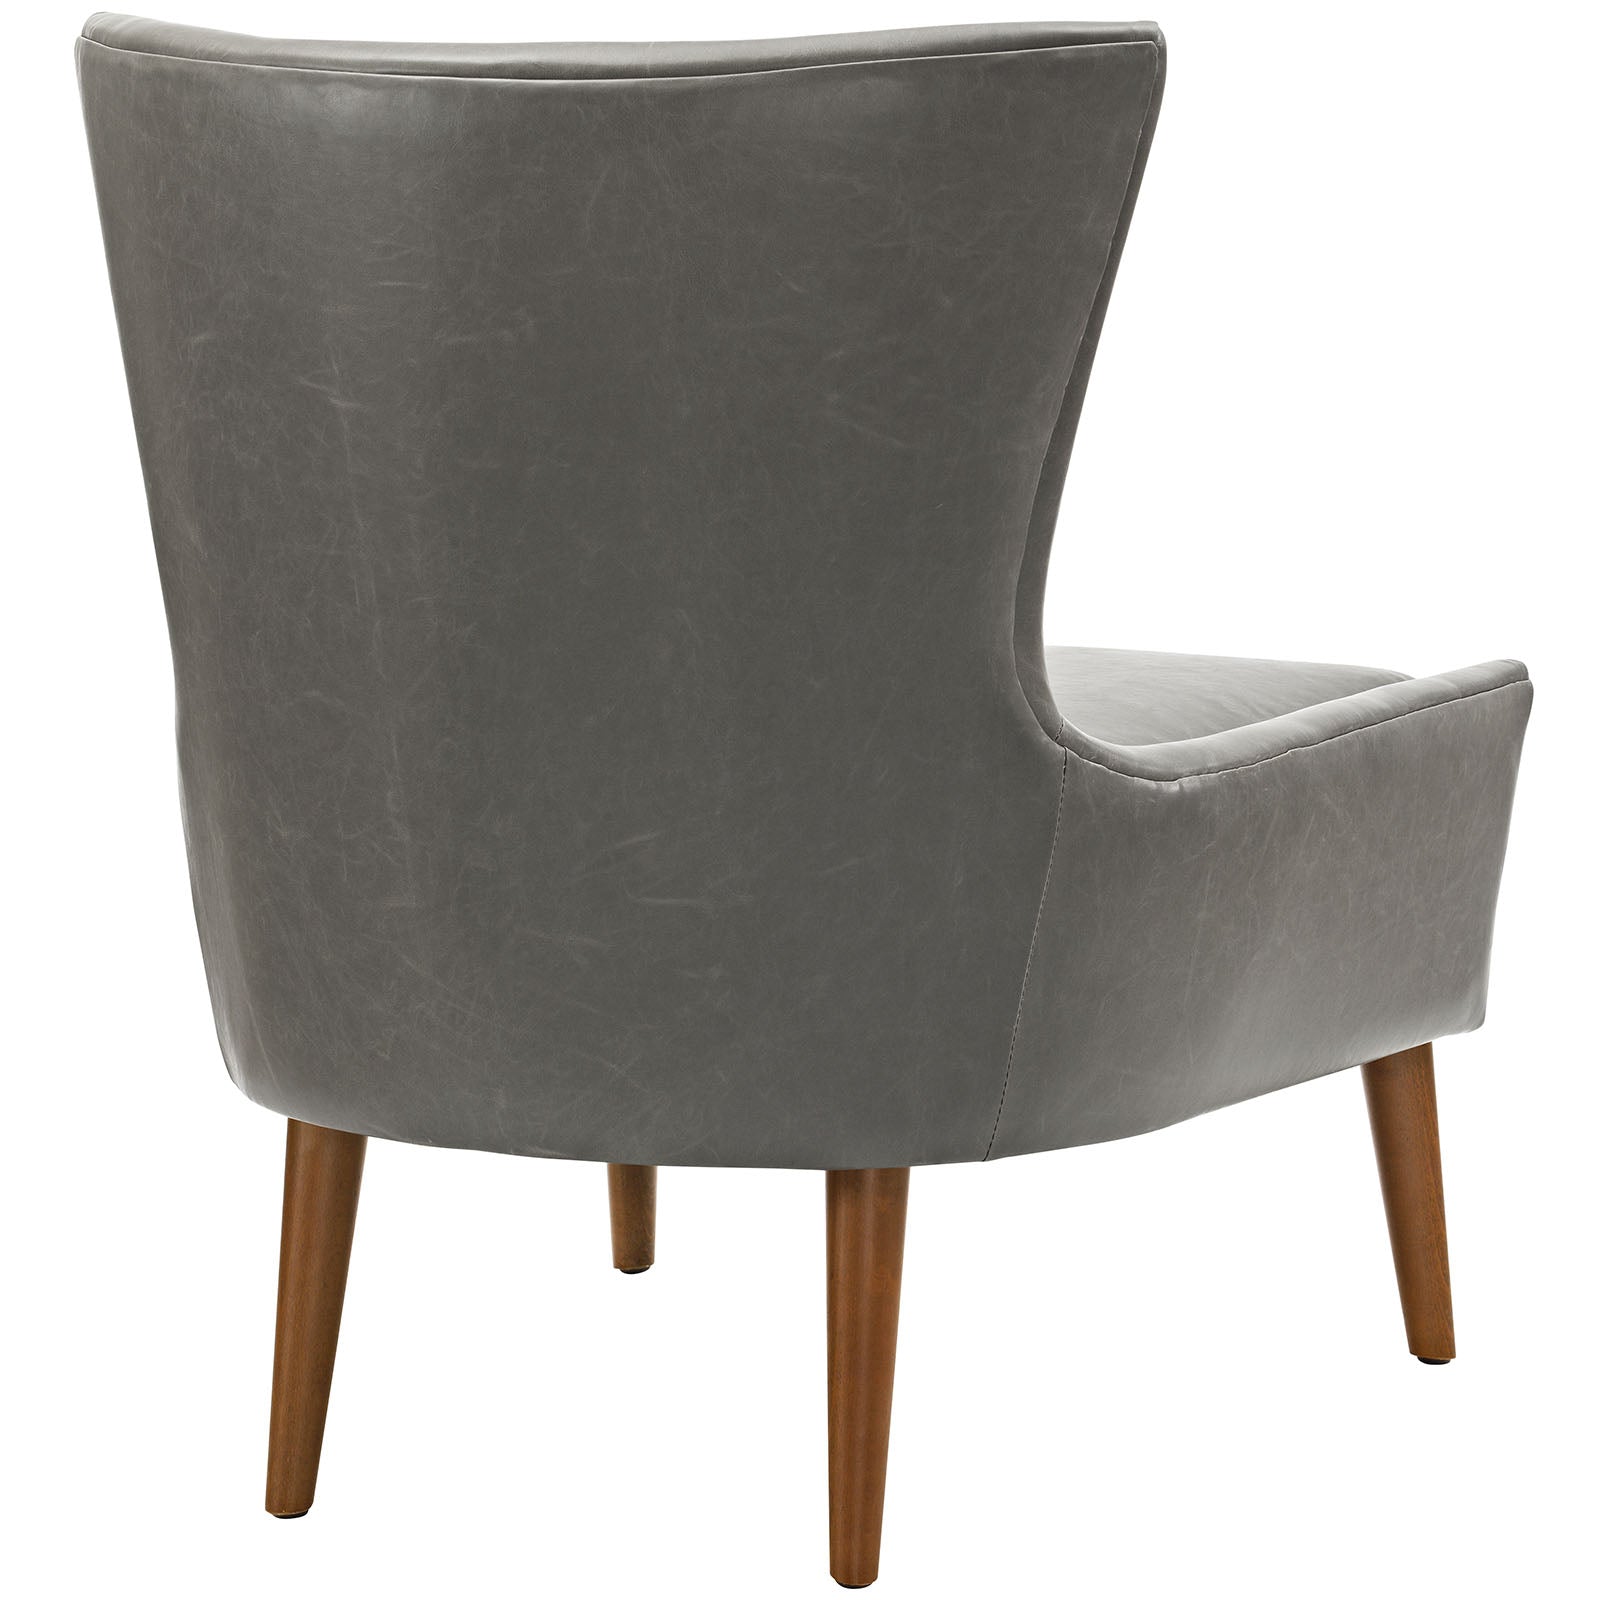 Modway Chairs - Keen Upholstered Vinyl Armchair Gray